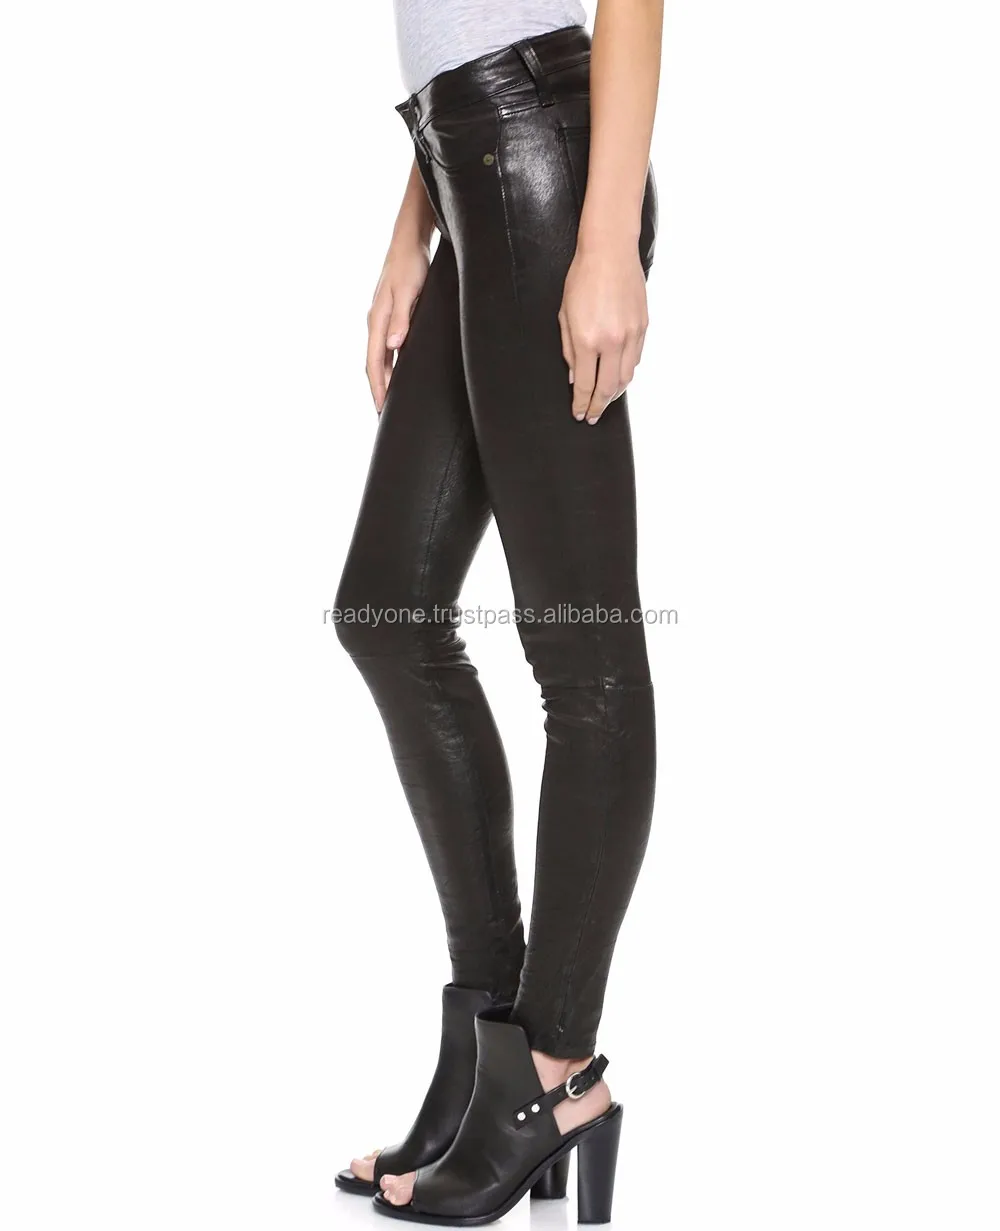 Best Selling High Quality Men Sexy Leather Pants Customized Buy Punk 5682